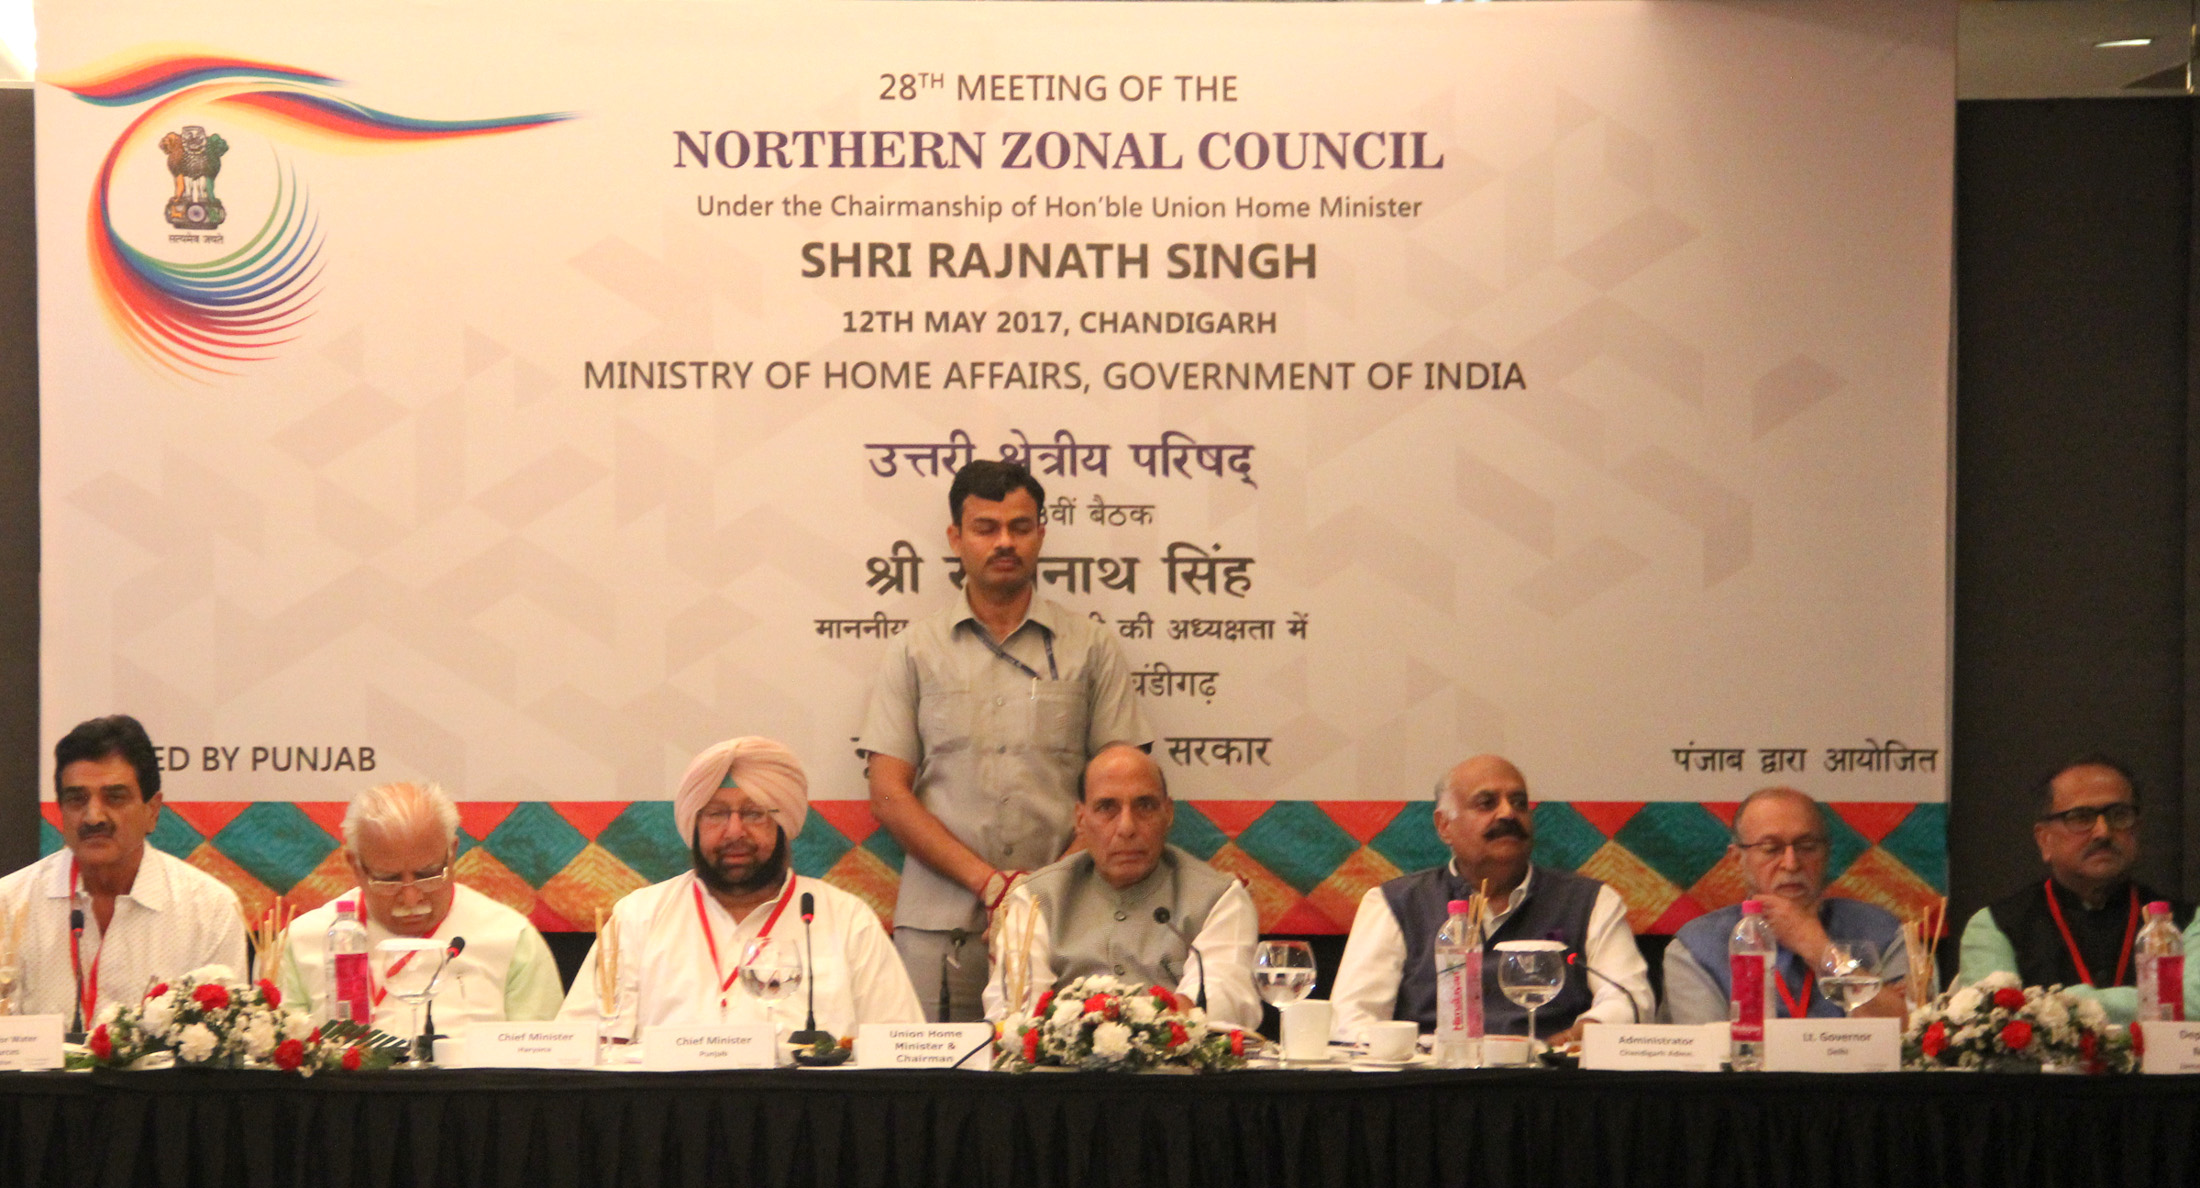 The Union Home Minister, Shri Rajnath Singh chairing the 28th meeting of the Northern Zonal Council, at Chandigarh on May 12, 2017. 	The Governor of Punjab and Administrator of U.T. Chandigarh, Shri. V.P. Singh Badnore and the Chief Minister of Haryana, Shri Manohar Lal Khattar, the Lt. Governor of Delhi, Shri Anil Baijal and the Deputy Chief Minister of Jammu and Kashmir, Dr. Nirmal Kumar Singh are also seen.